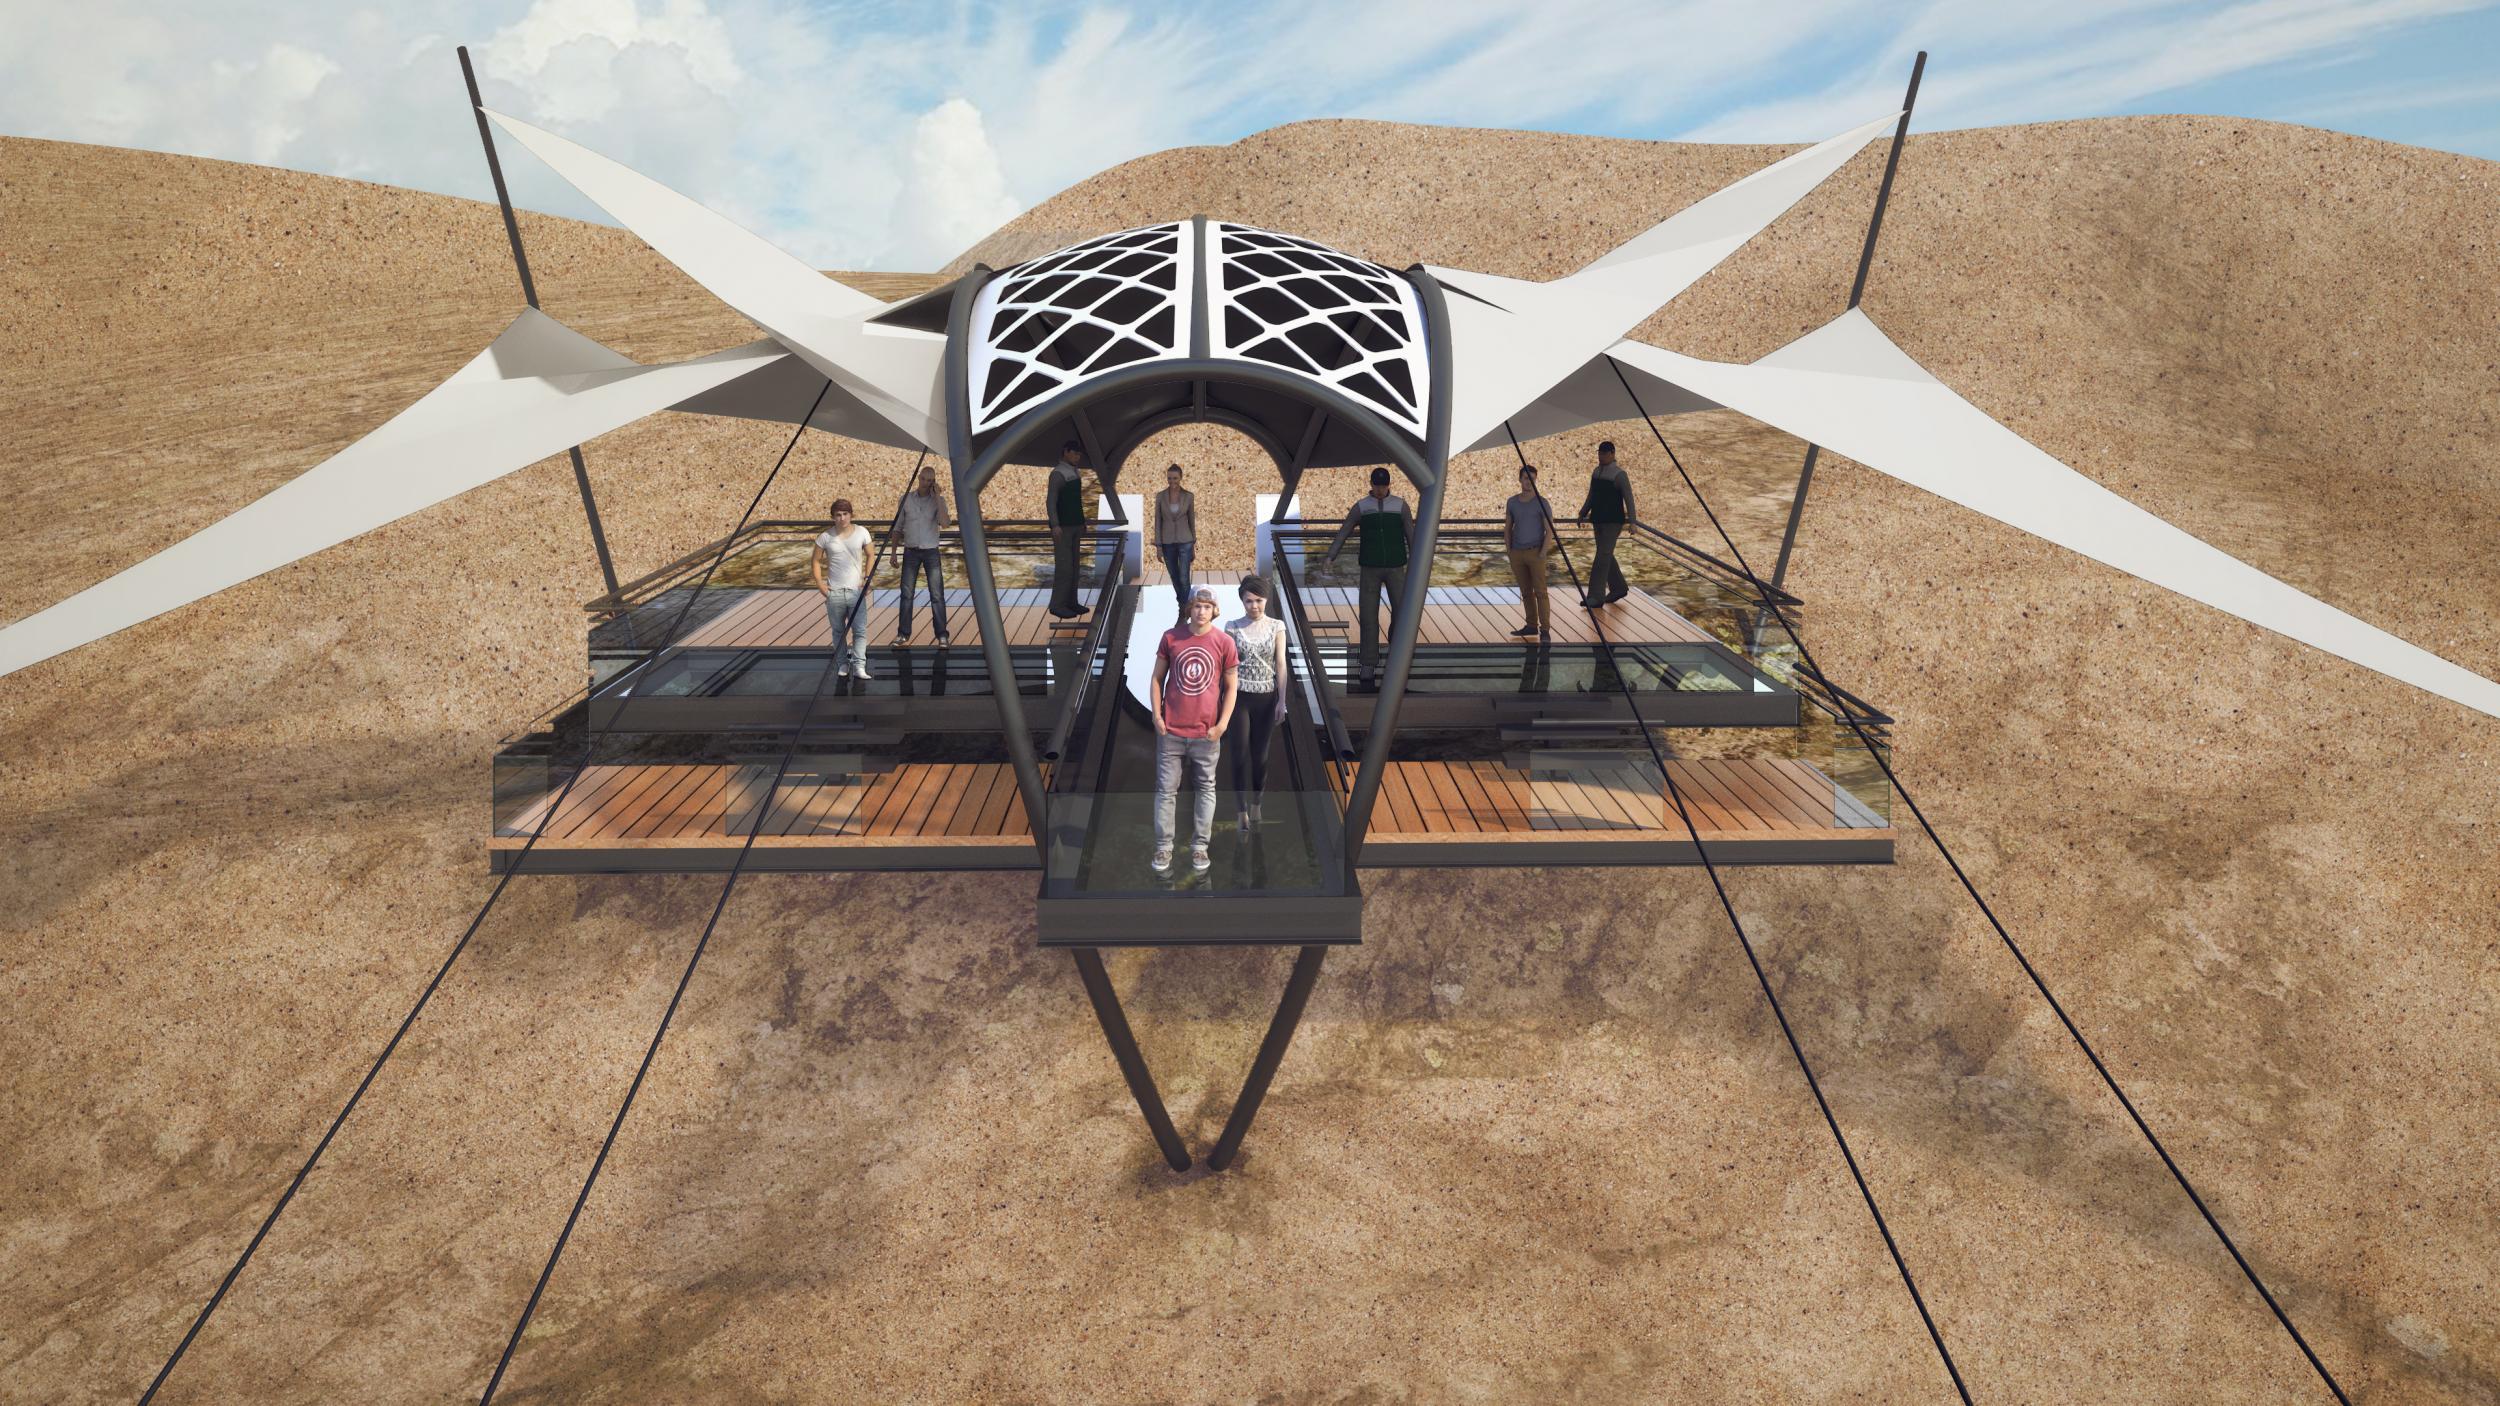 A graphic of the launch platform for the new zip line